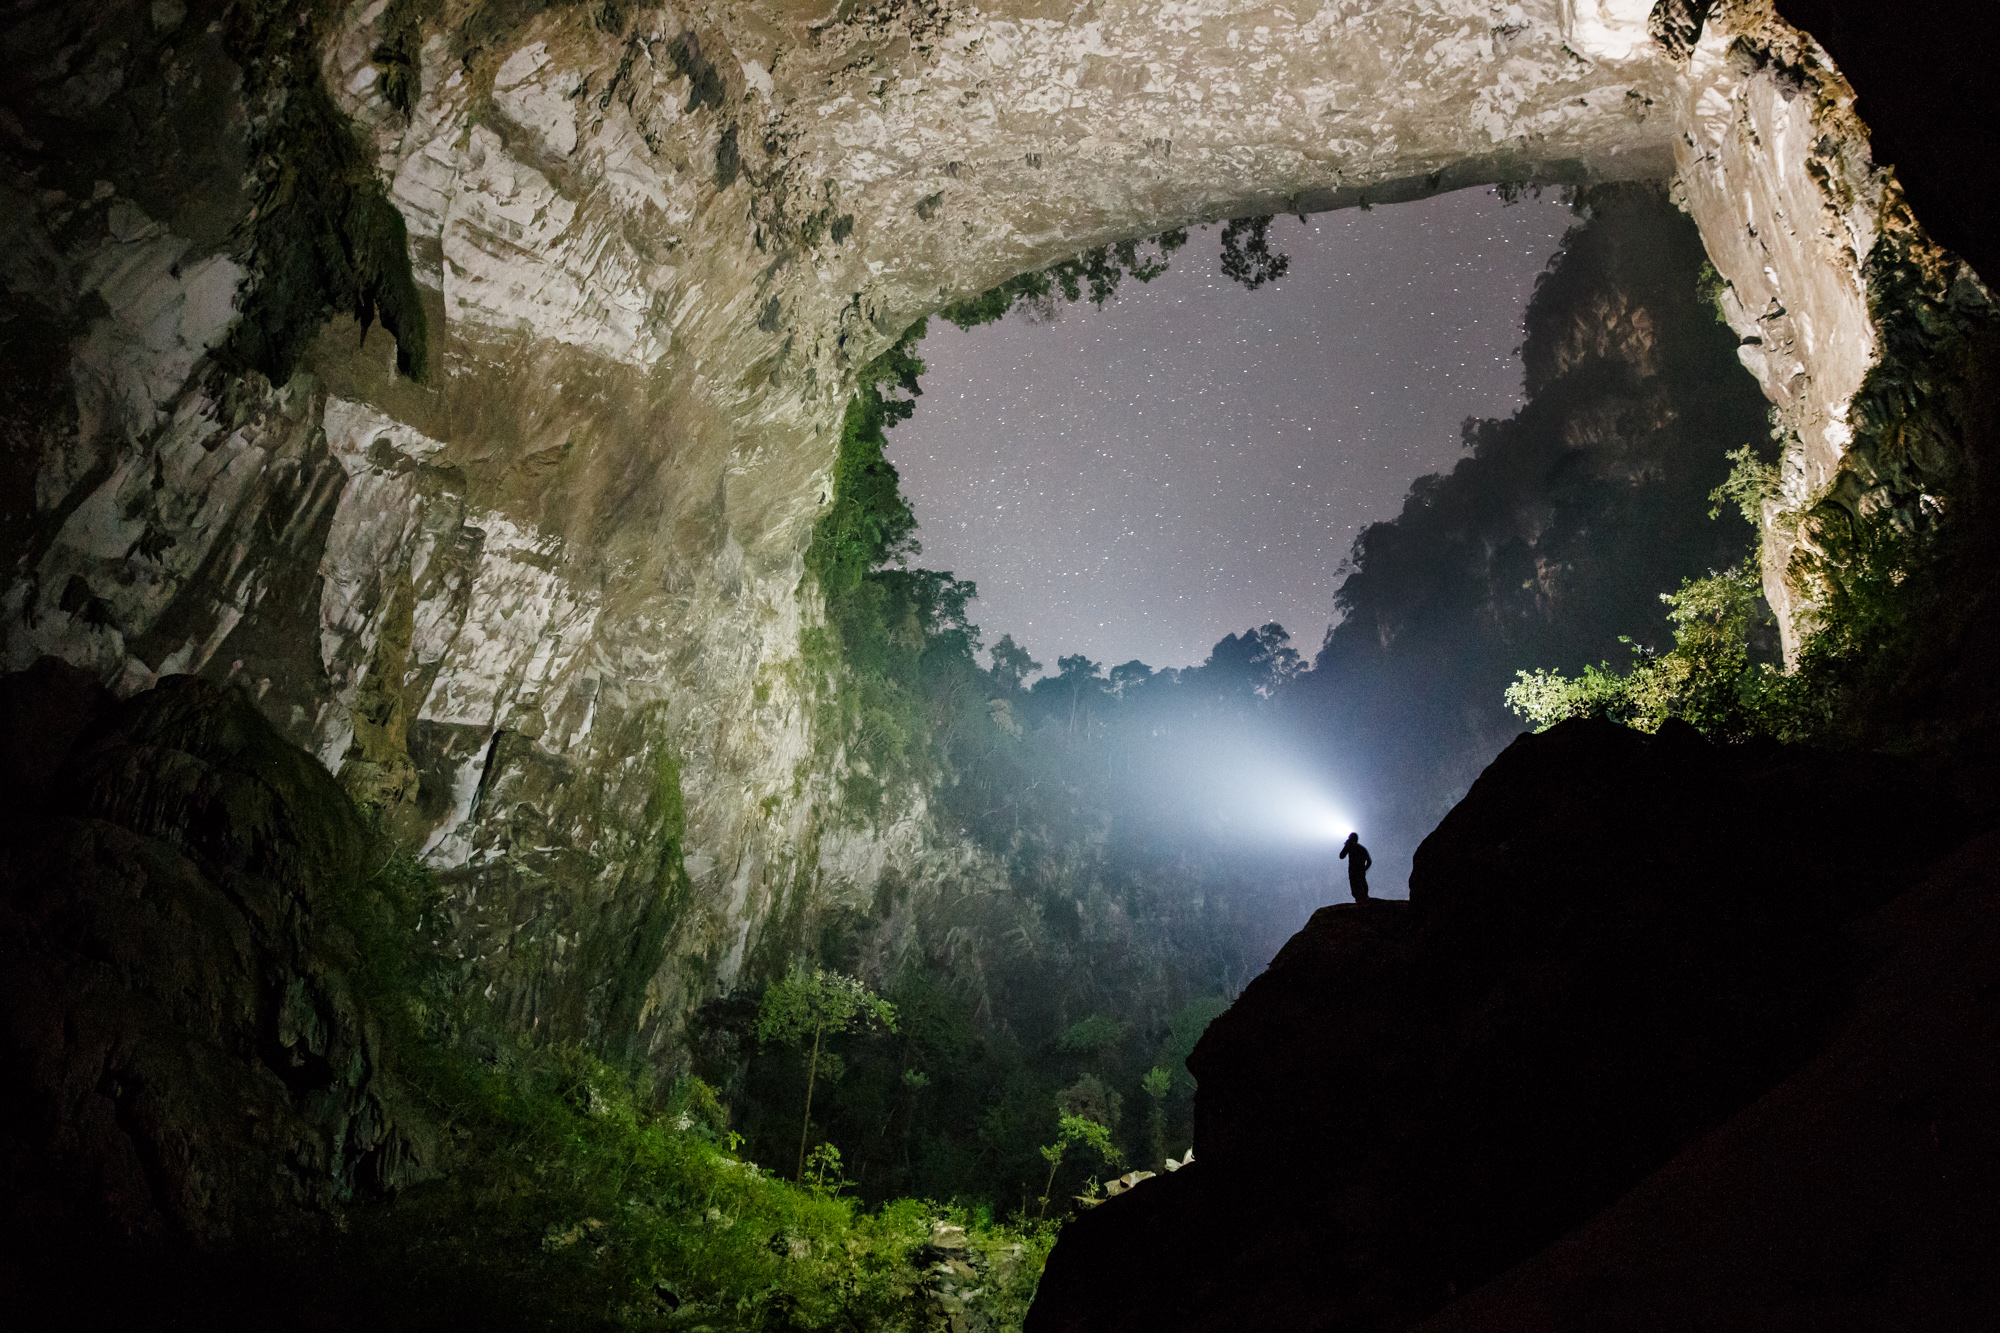 Cookson clients explore the largest cave system in the world, Son Doong.